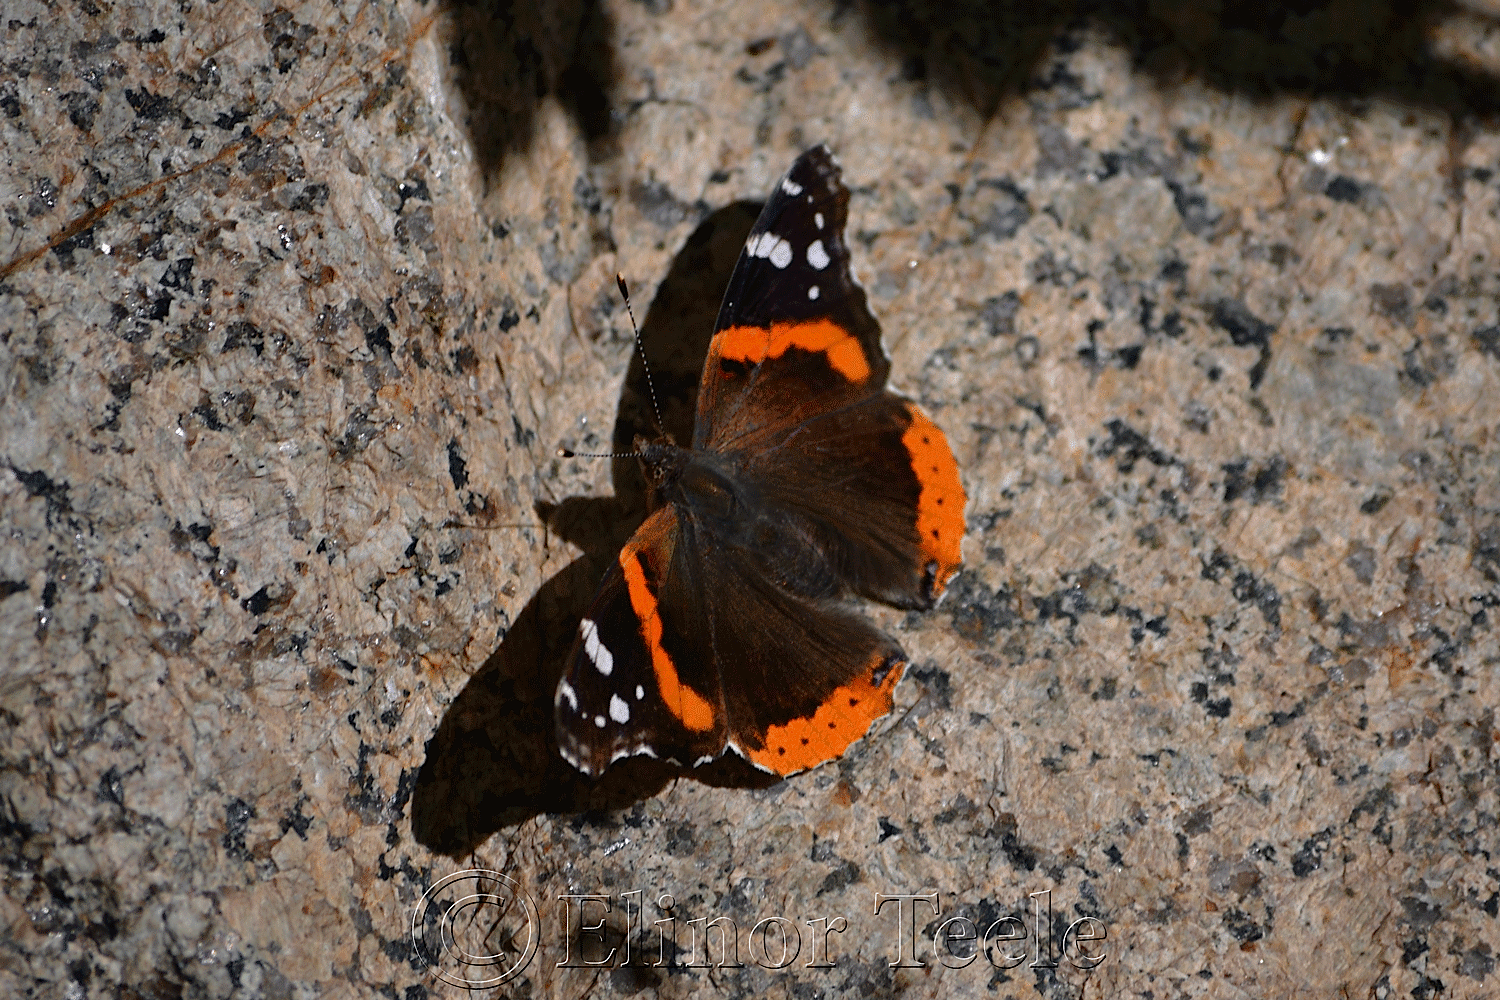 Red Admiral Butterfly, Ravenswood MA